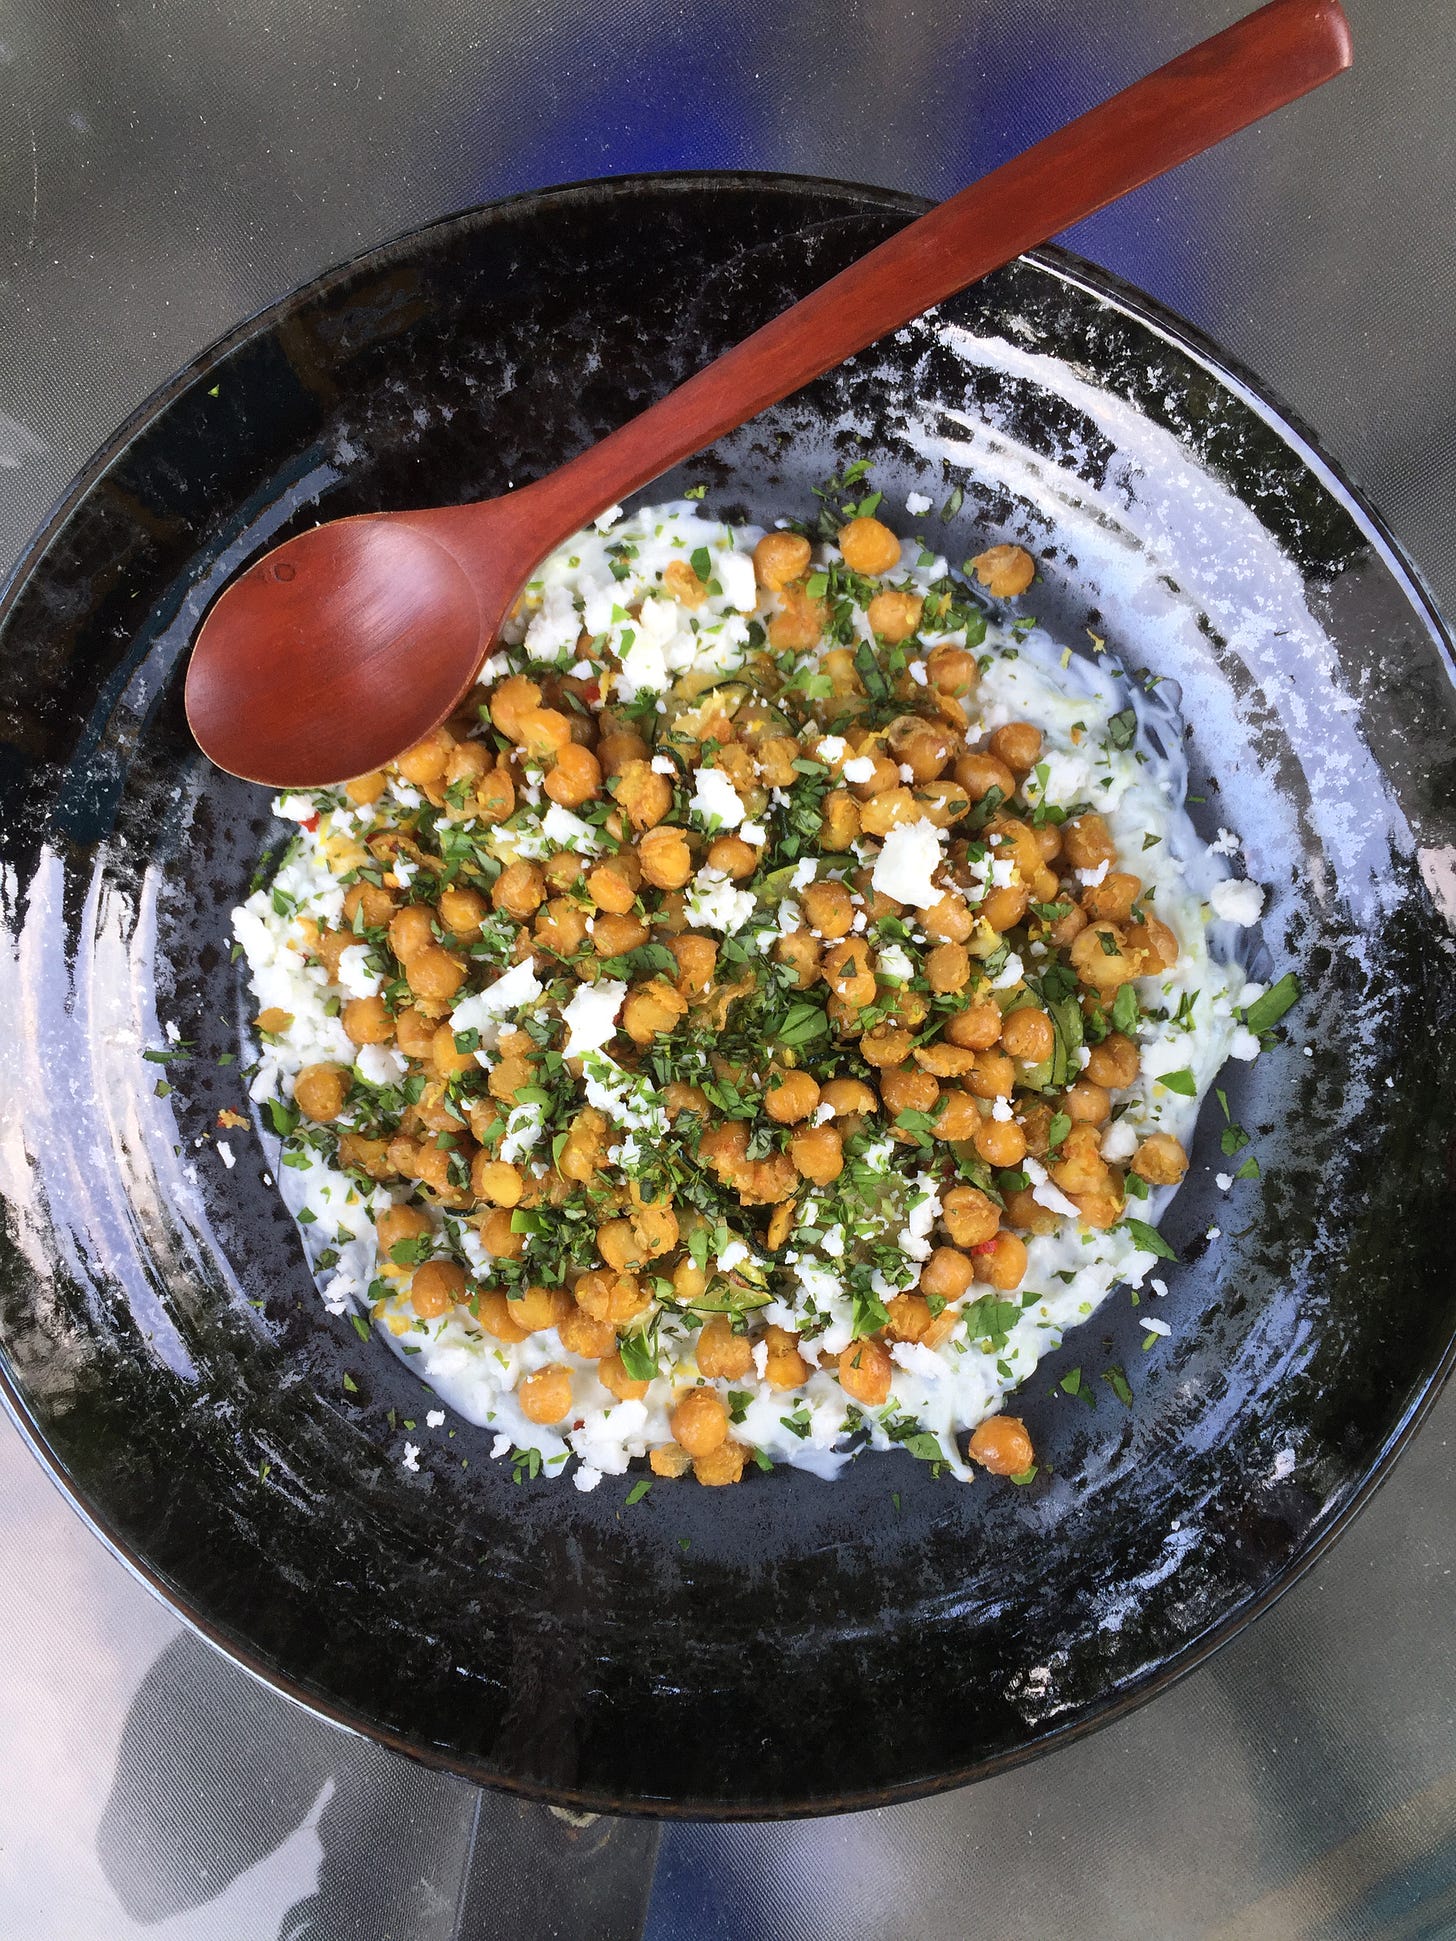 from above, a shallow black plate filled with tzatziki topped with zucchini, fried chickpeas, and a scattering of herbs and crumbled feta. A wooden spoon sits an an angle near the top.